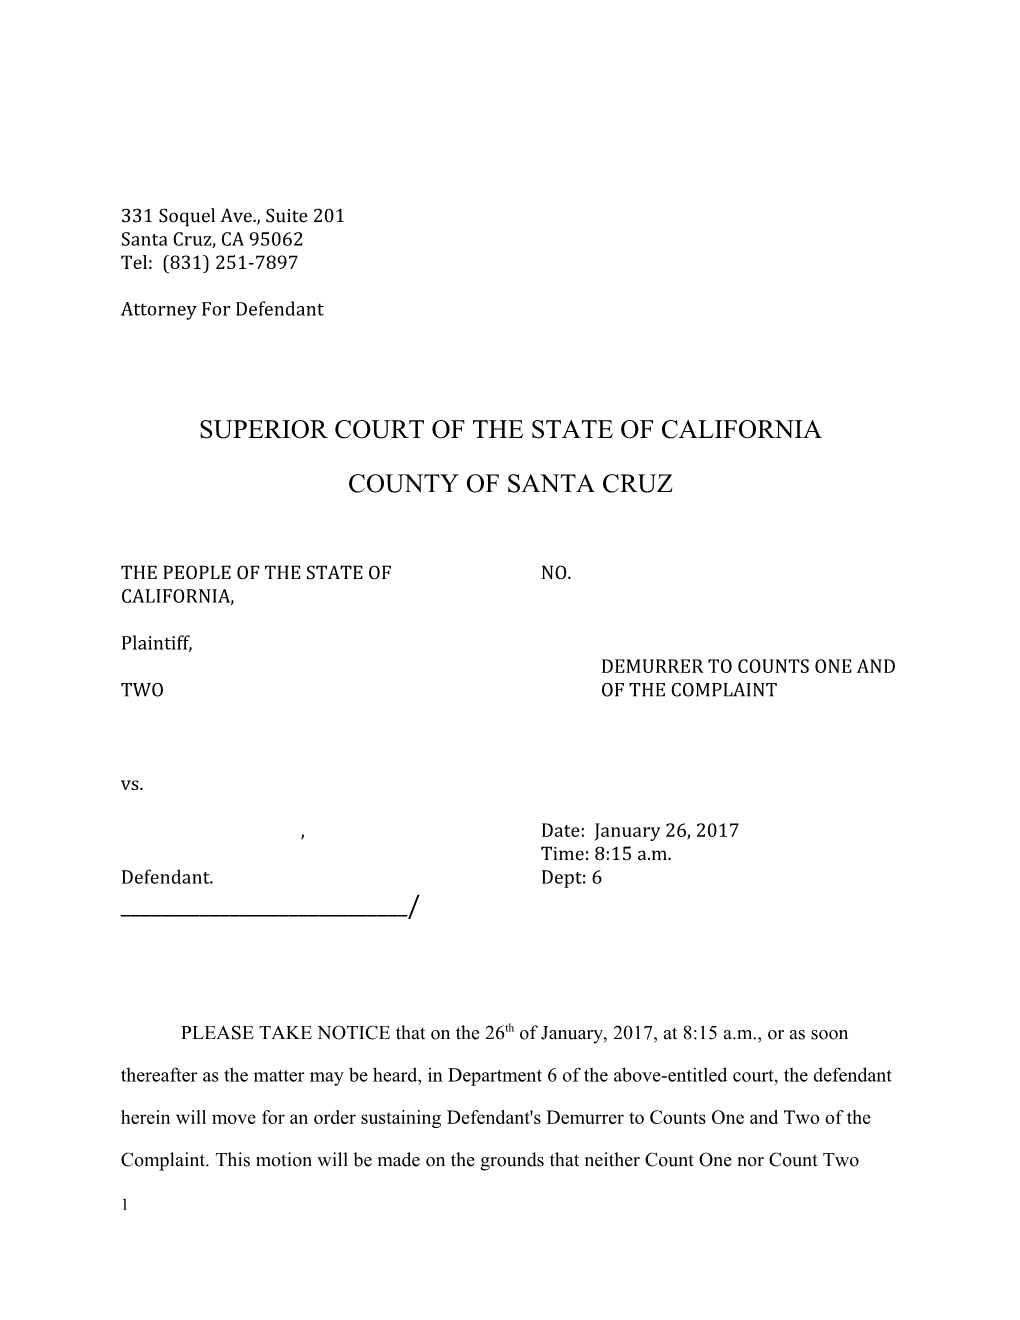 Superior Court of the State of California s6